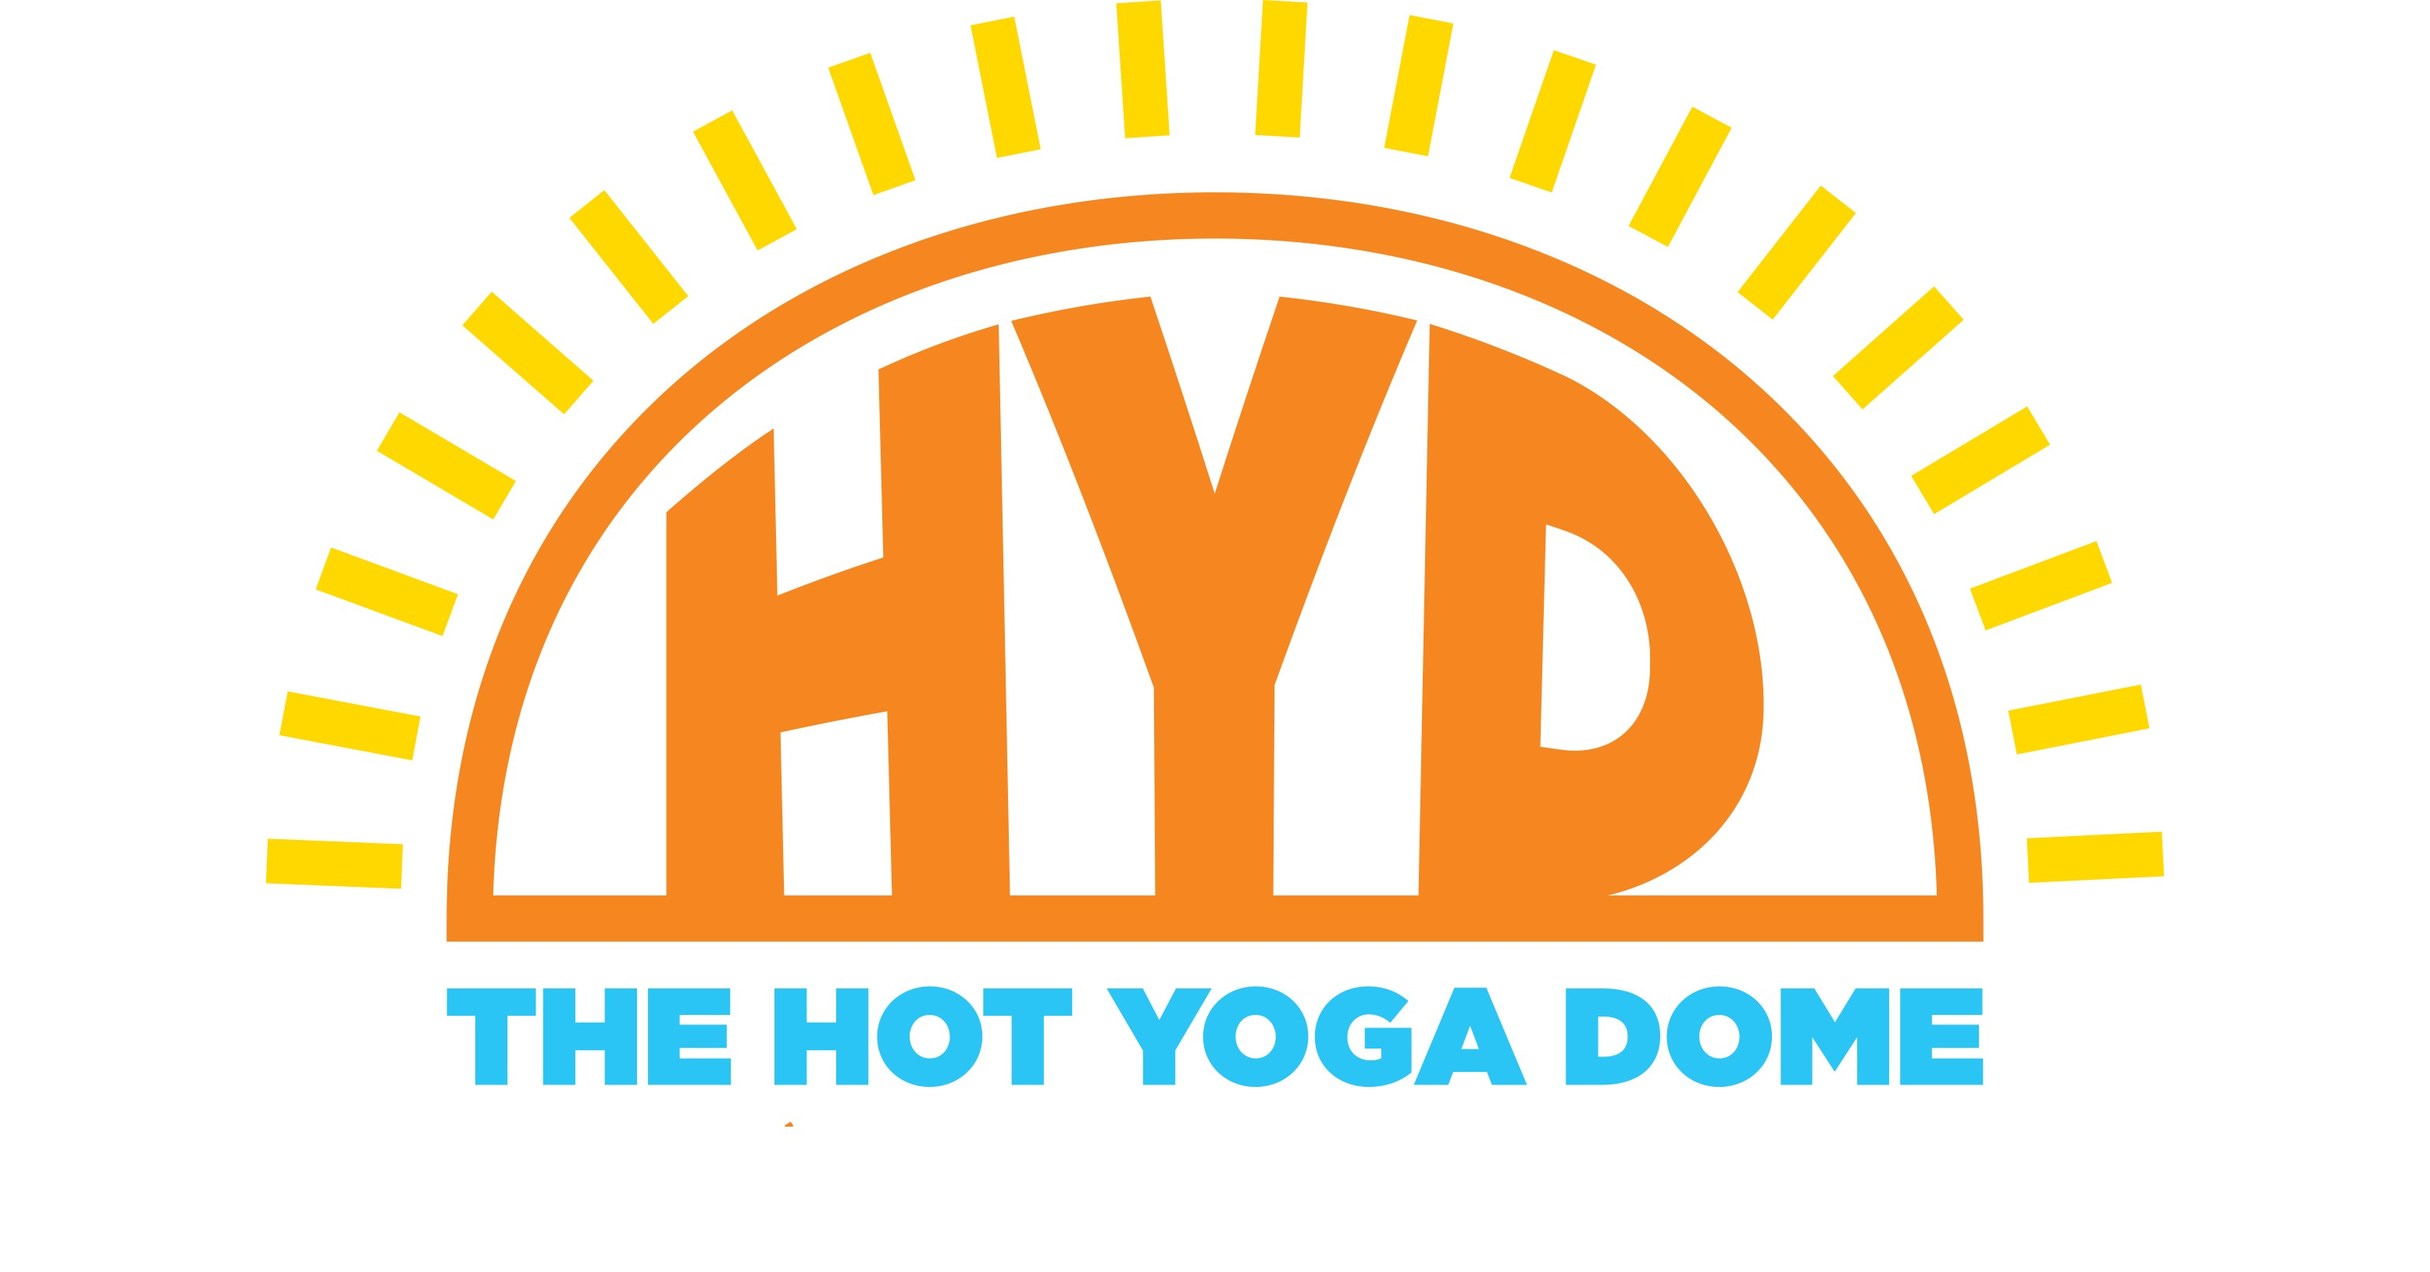 The Hot Yoga Dome Adds the Tiny Dome to their Line of First-to-Market,  At-Home Portable Hot Yoga Studios